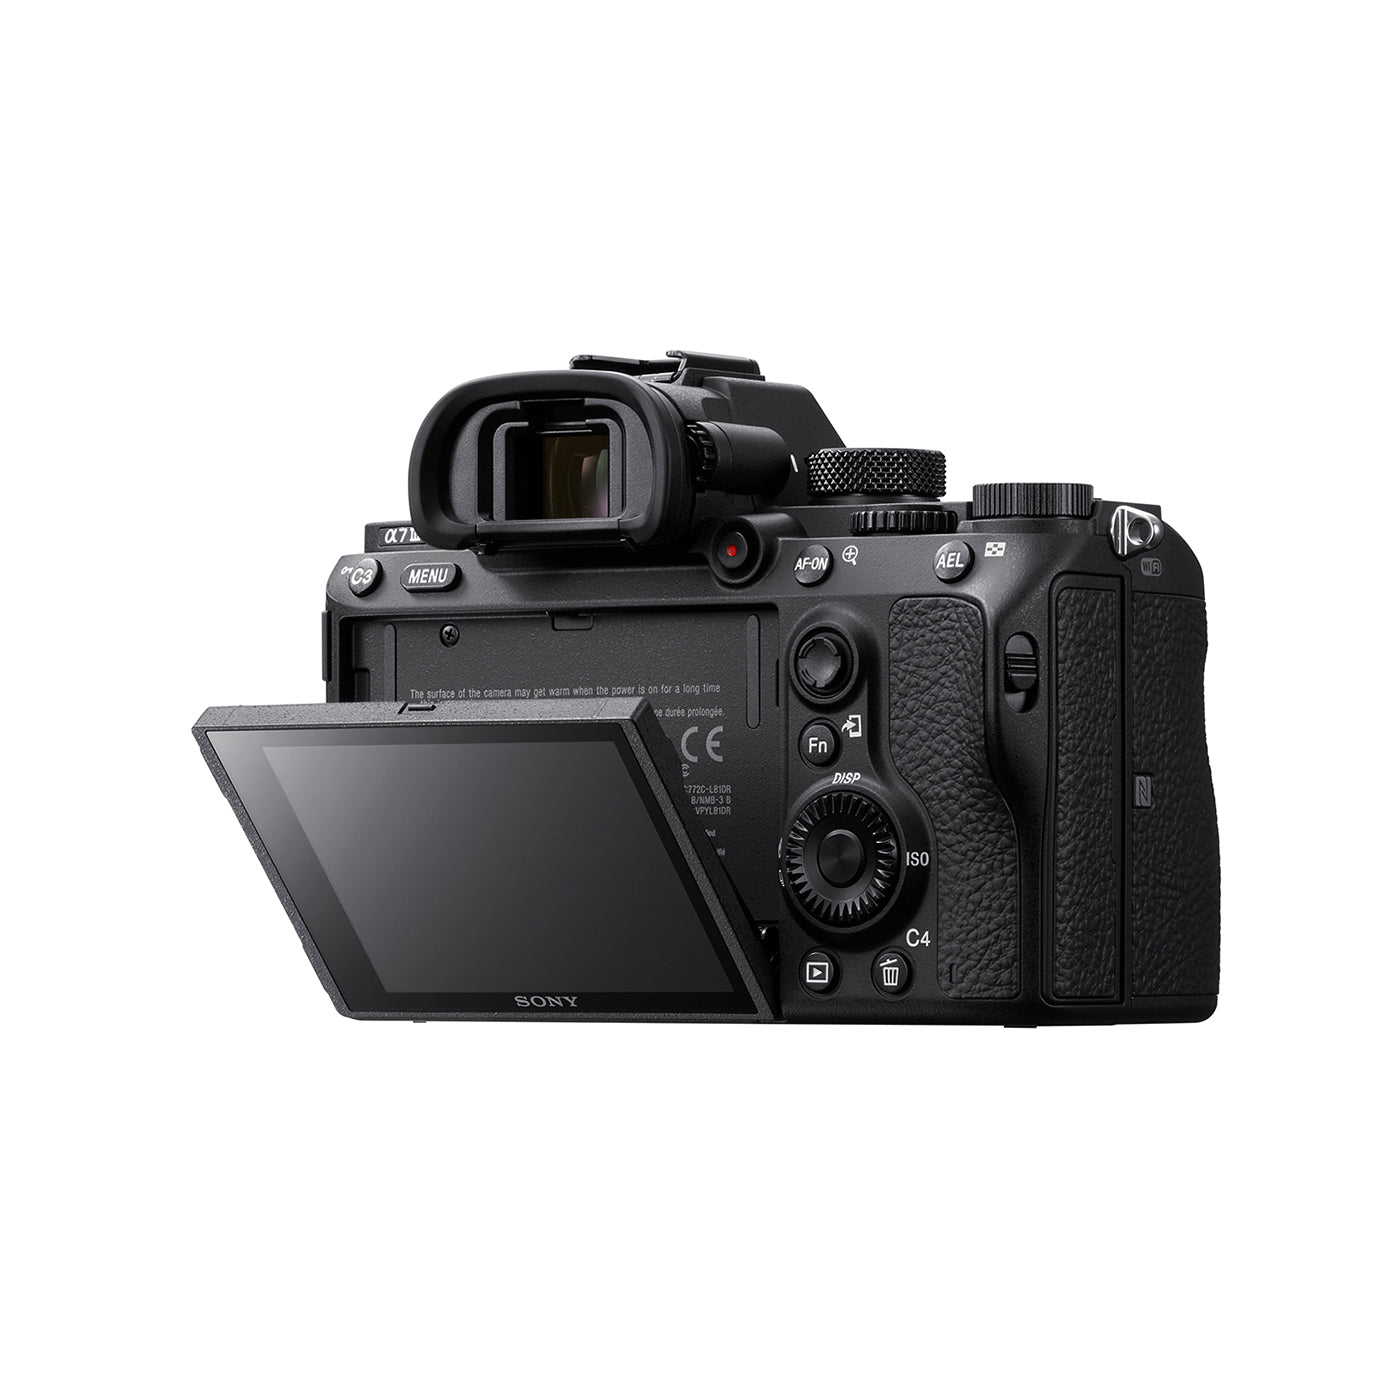 Sony Alpha 7 III with 35 mm Full-Frame Image Sensor (ILCE-7M3) | 24.2 MP Mirrorless Camera, 10FPS, 4K/30p